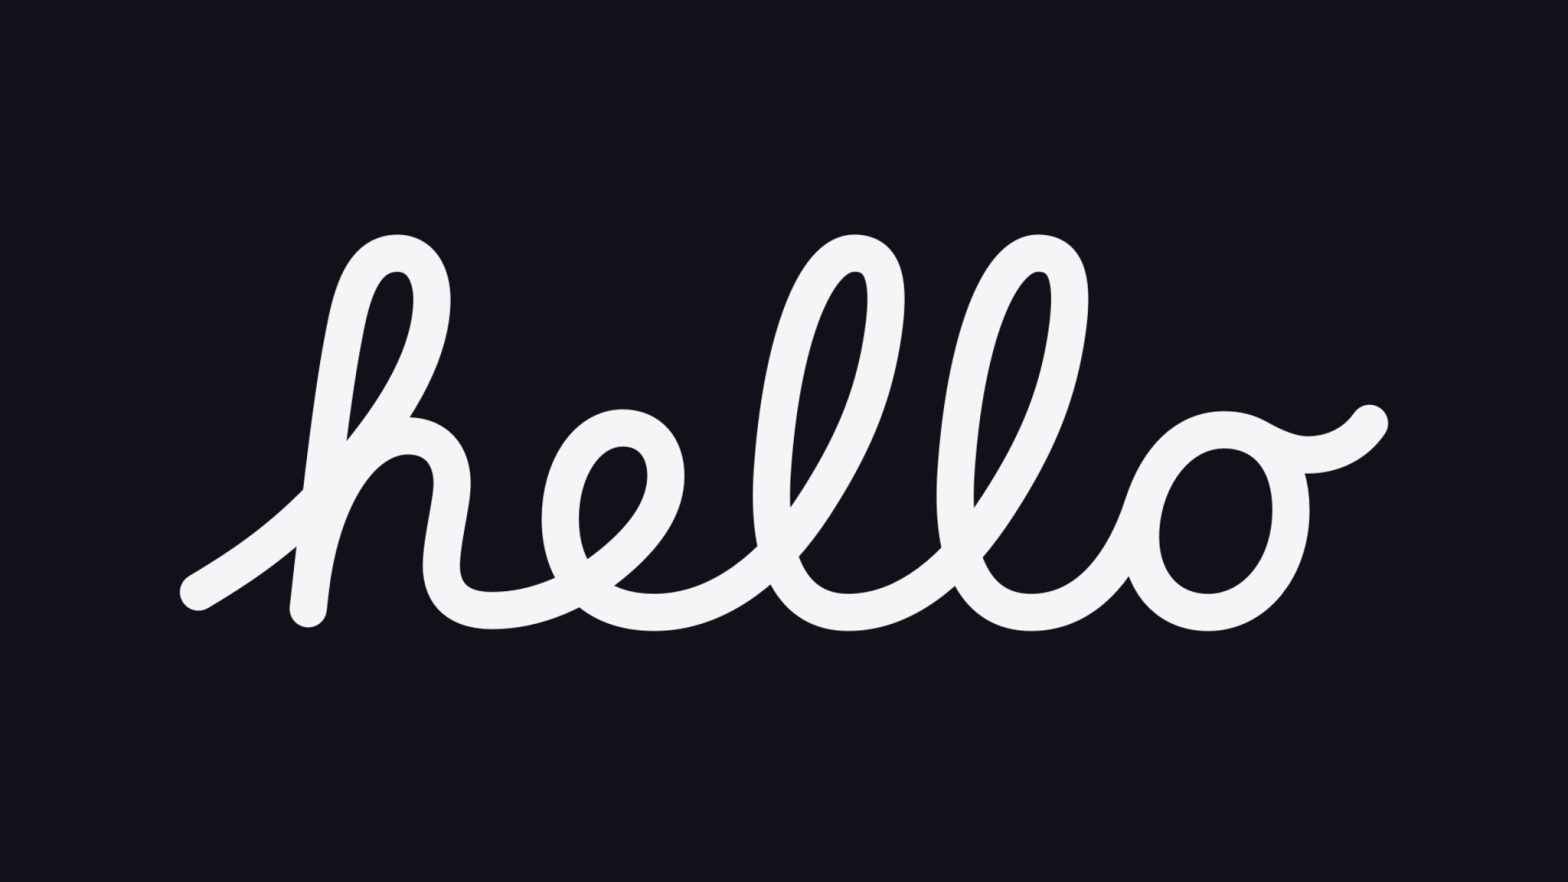 The word “Hello” in white script text on a black background.